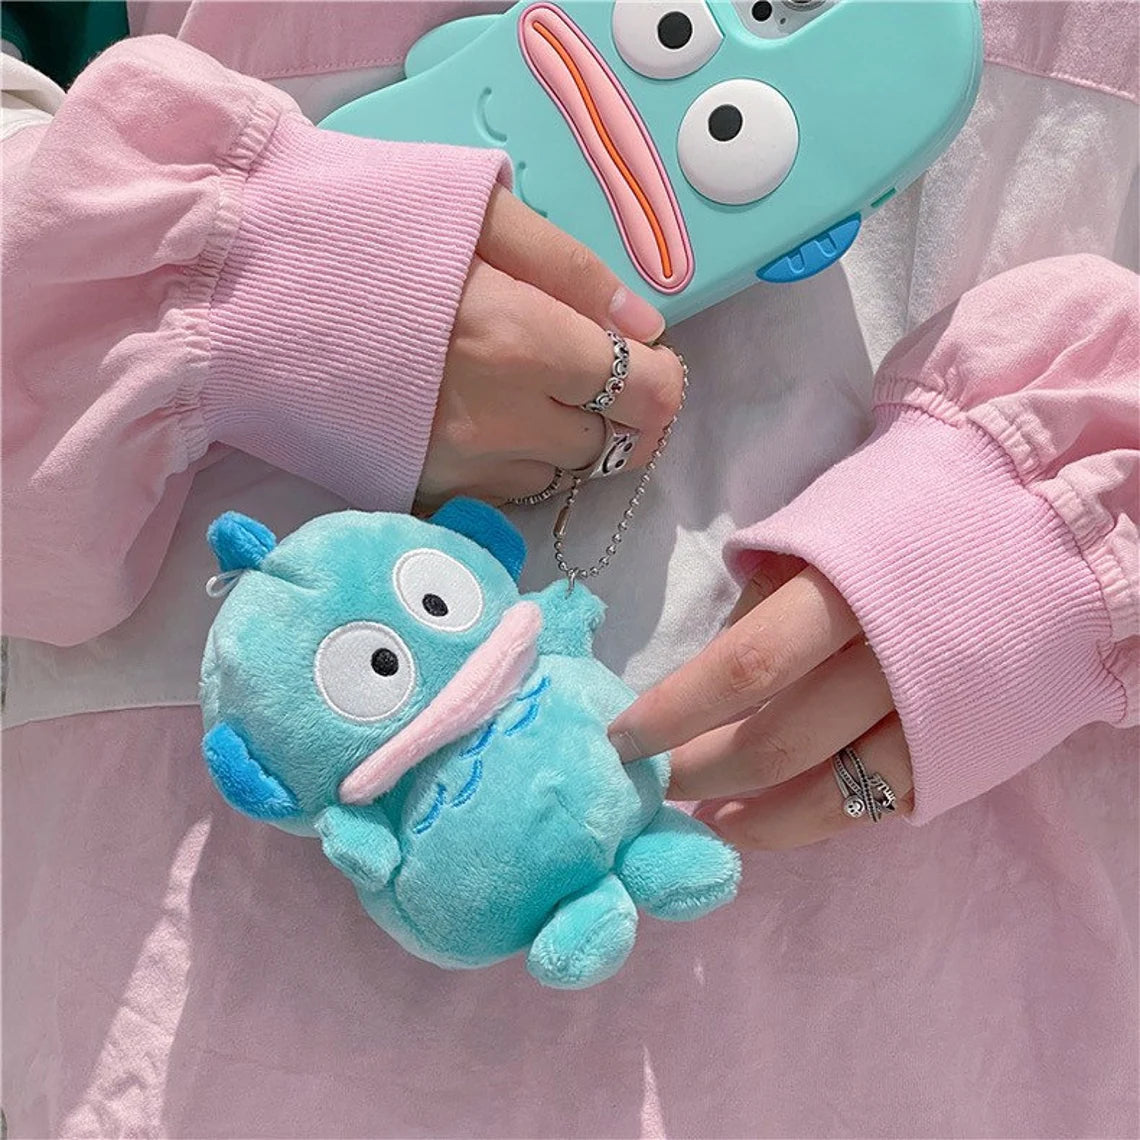 Hangyodon Plush Doll Style AirPods AirPodsPro AirPods3 Case